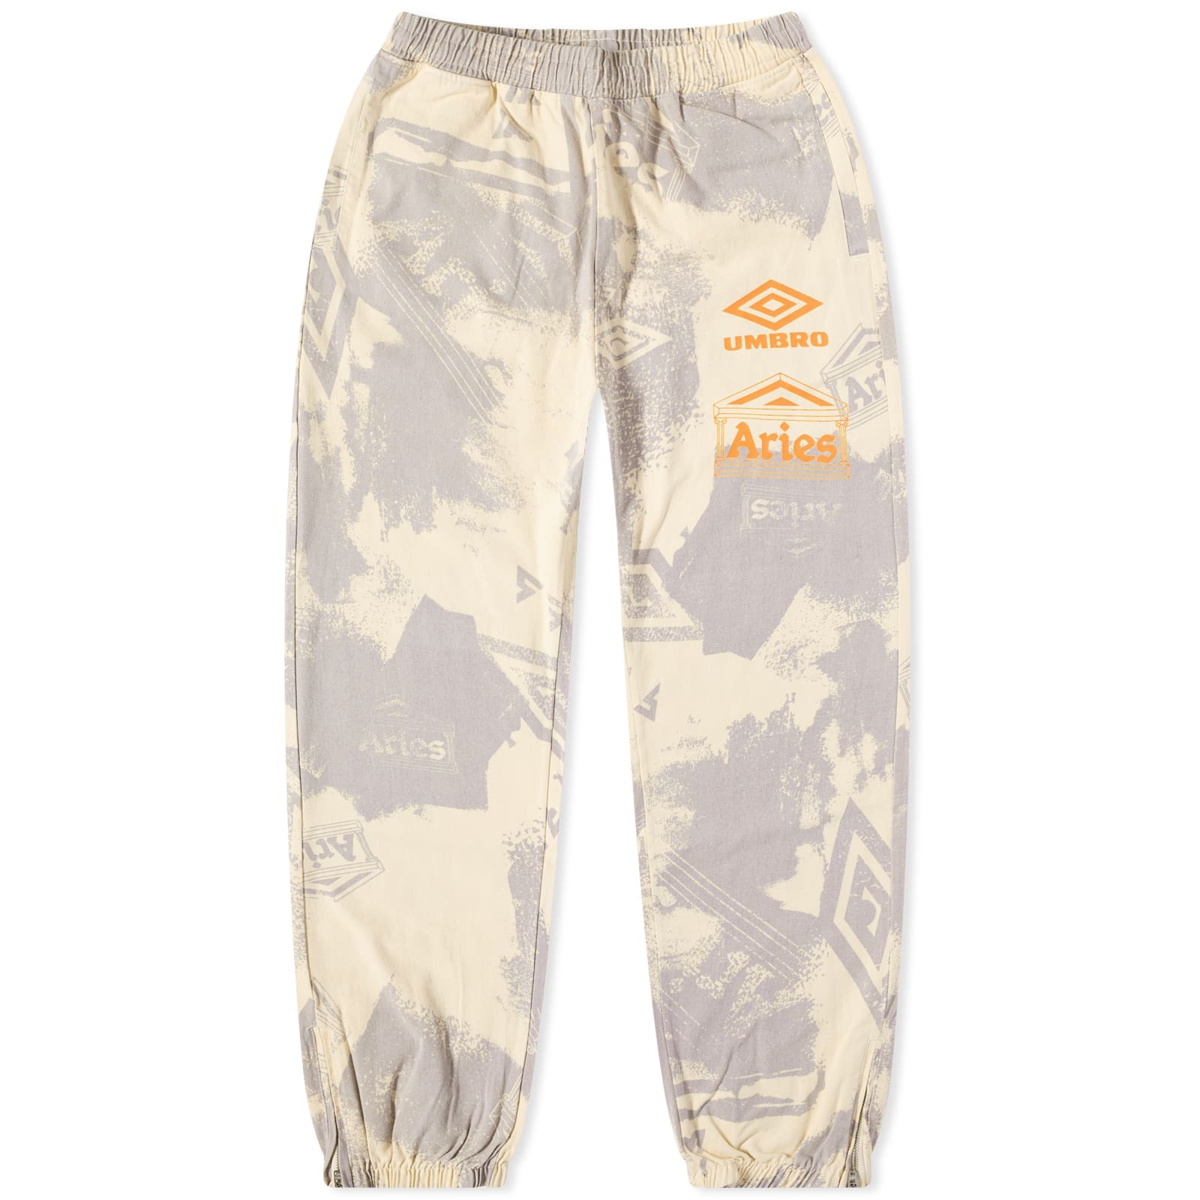 Aries x Umbro Pro 64 Pant in Beige/Lilac ARIES